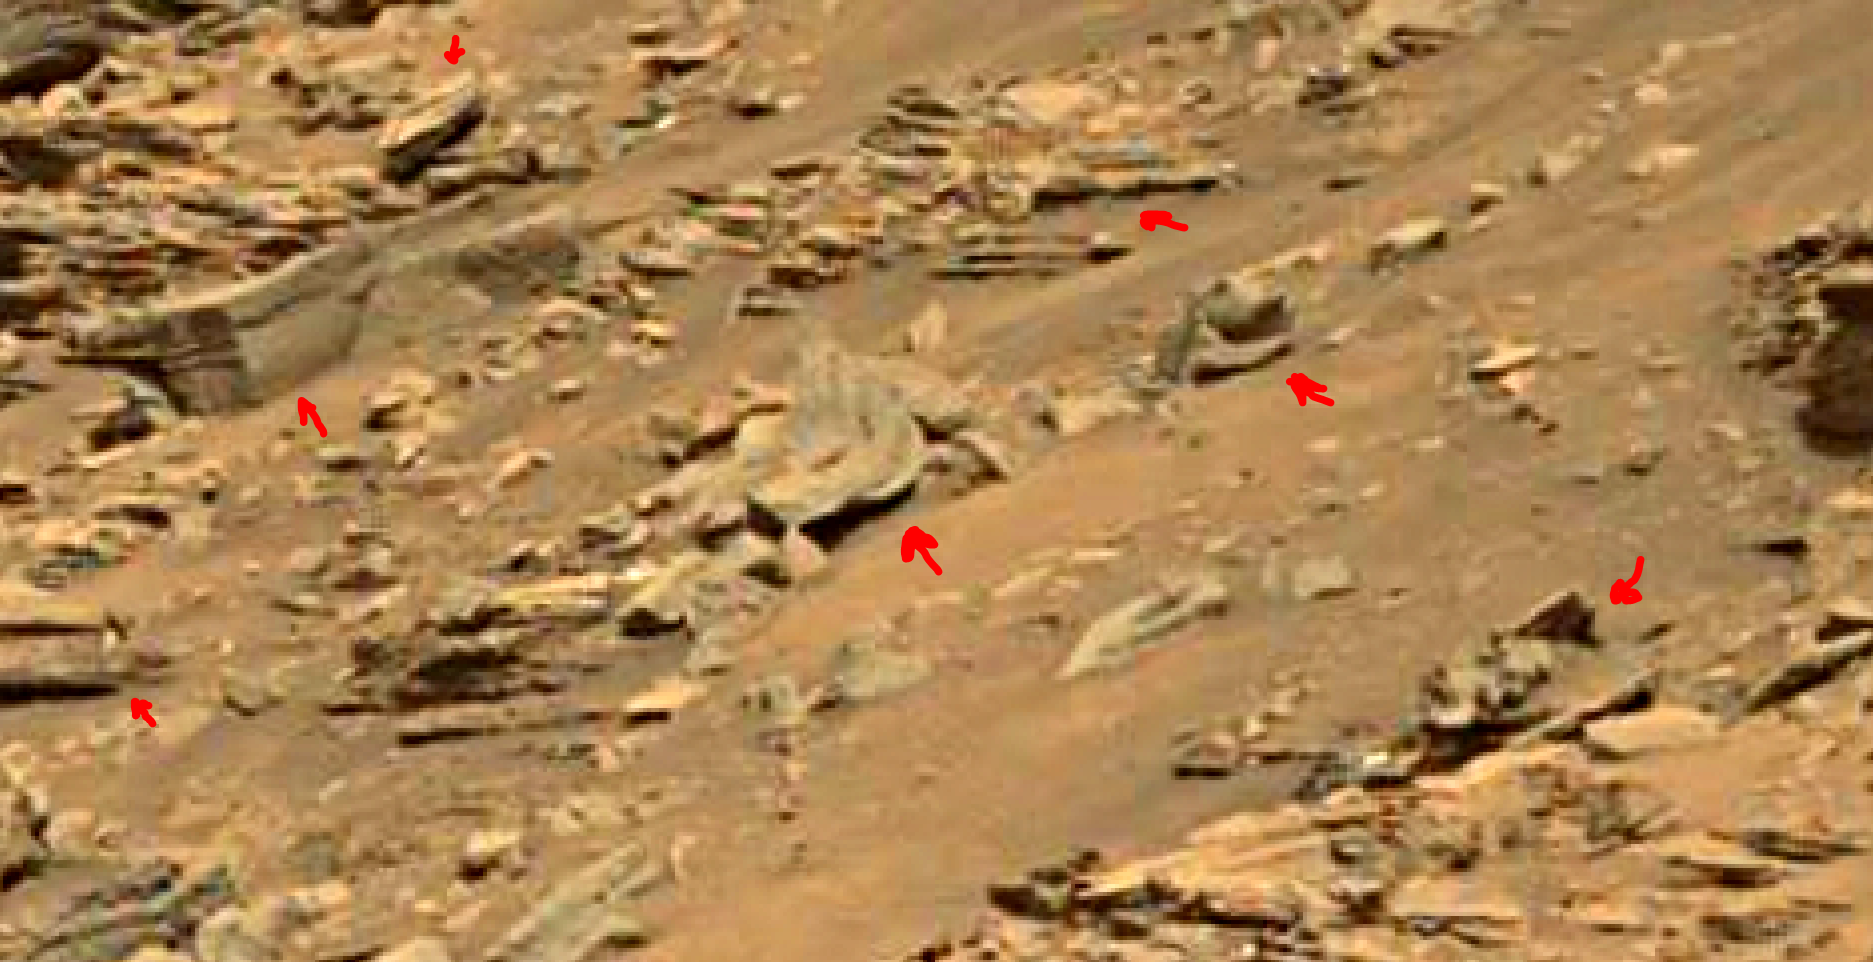 mars-sol-1451-anomaly-artifacts-7-was-life-on-mars